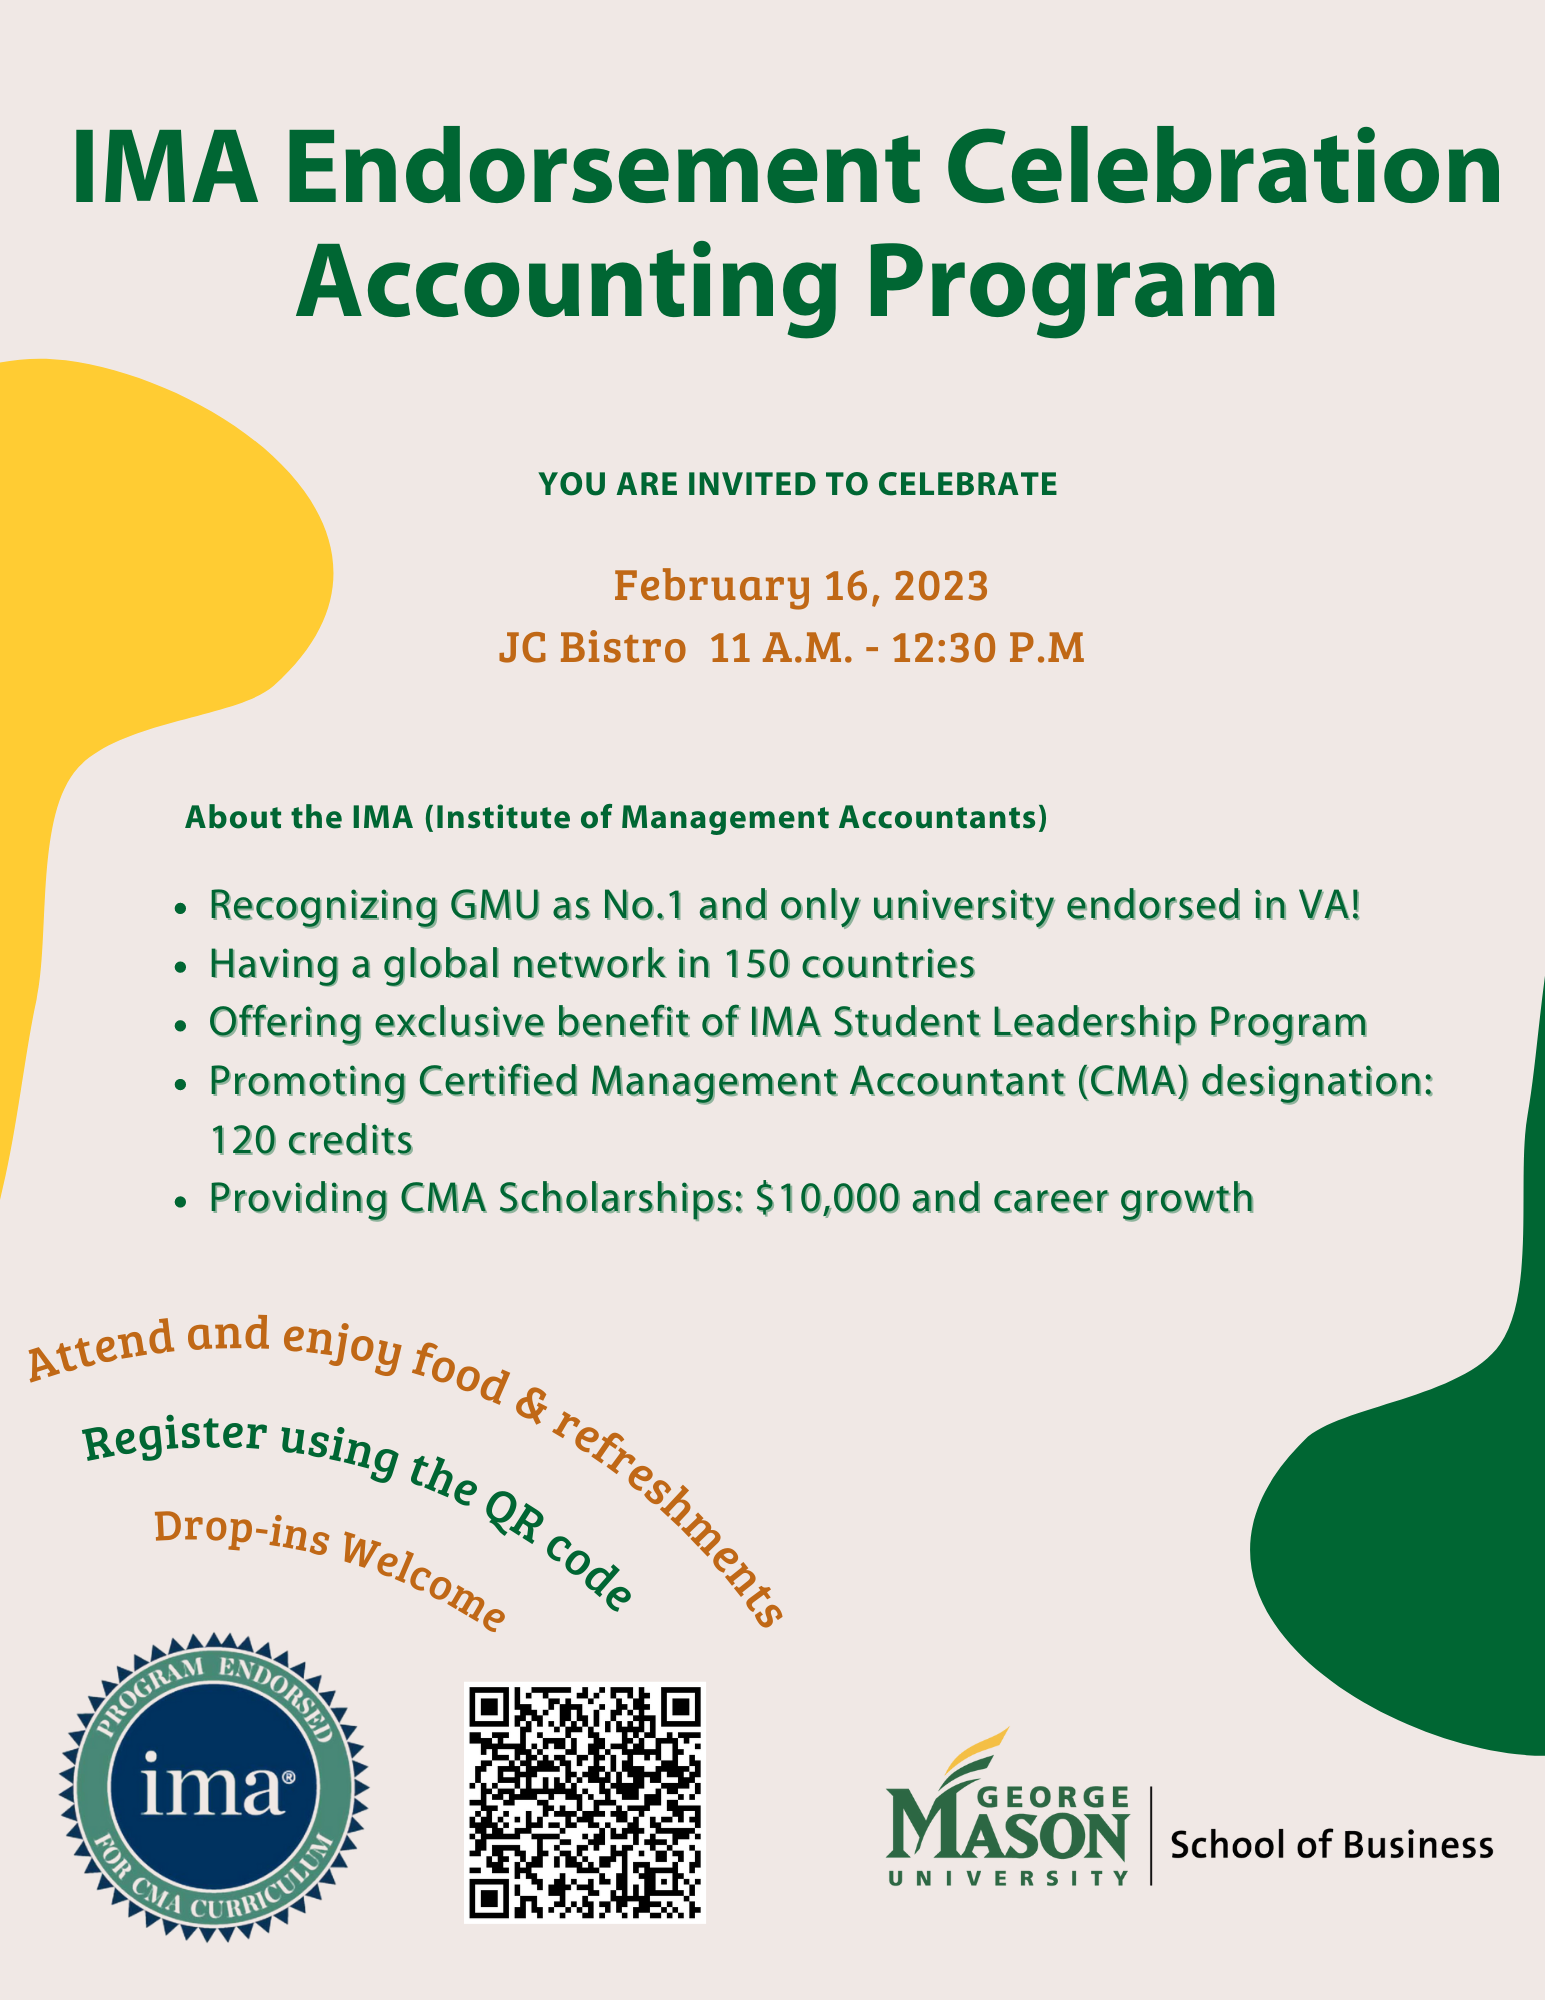 A flyer for the event is attached. You are invited to the IMA Endorsement Celebration Accounting Program on February 16, 2023 in the Johnson Center Bistro from 11:00 a.m. - 12:30 p.m. students can scan the QR code on the flyer or follow the link in the description above to RSVP.